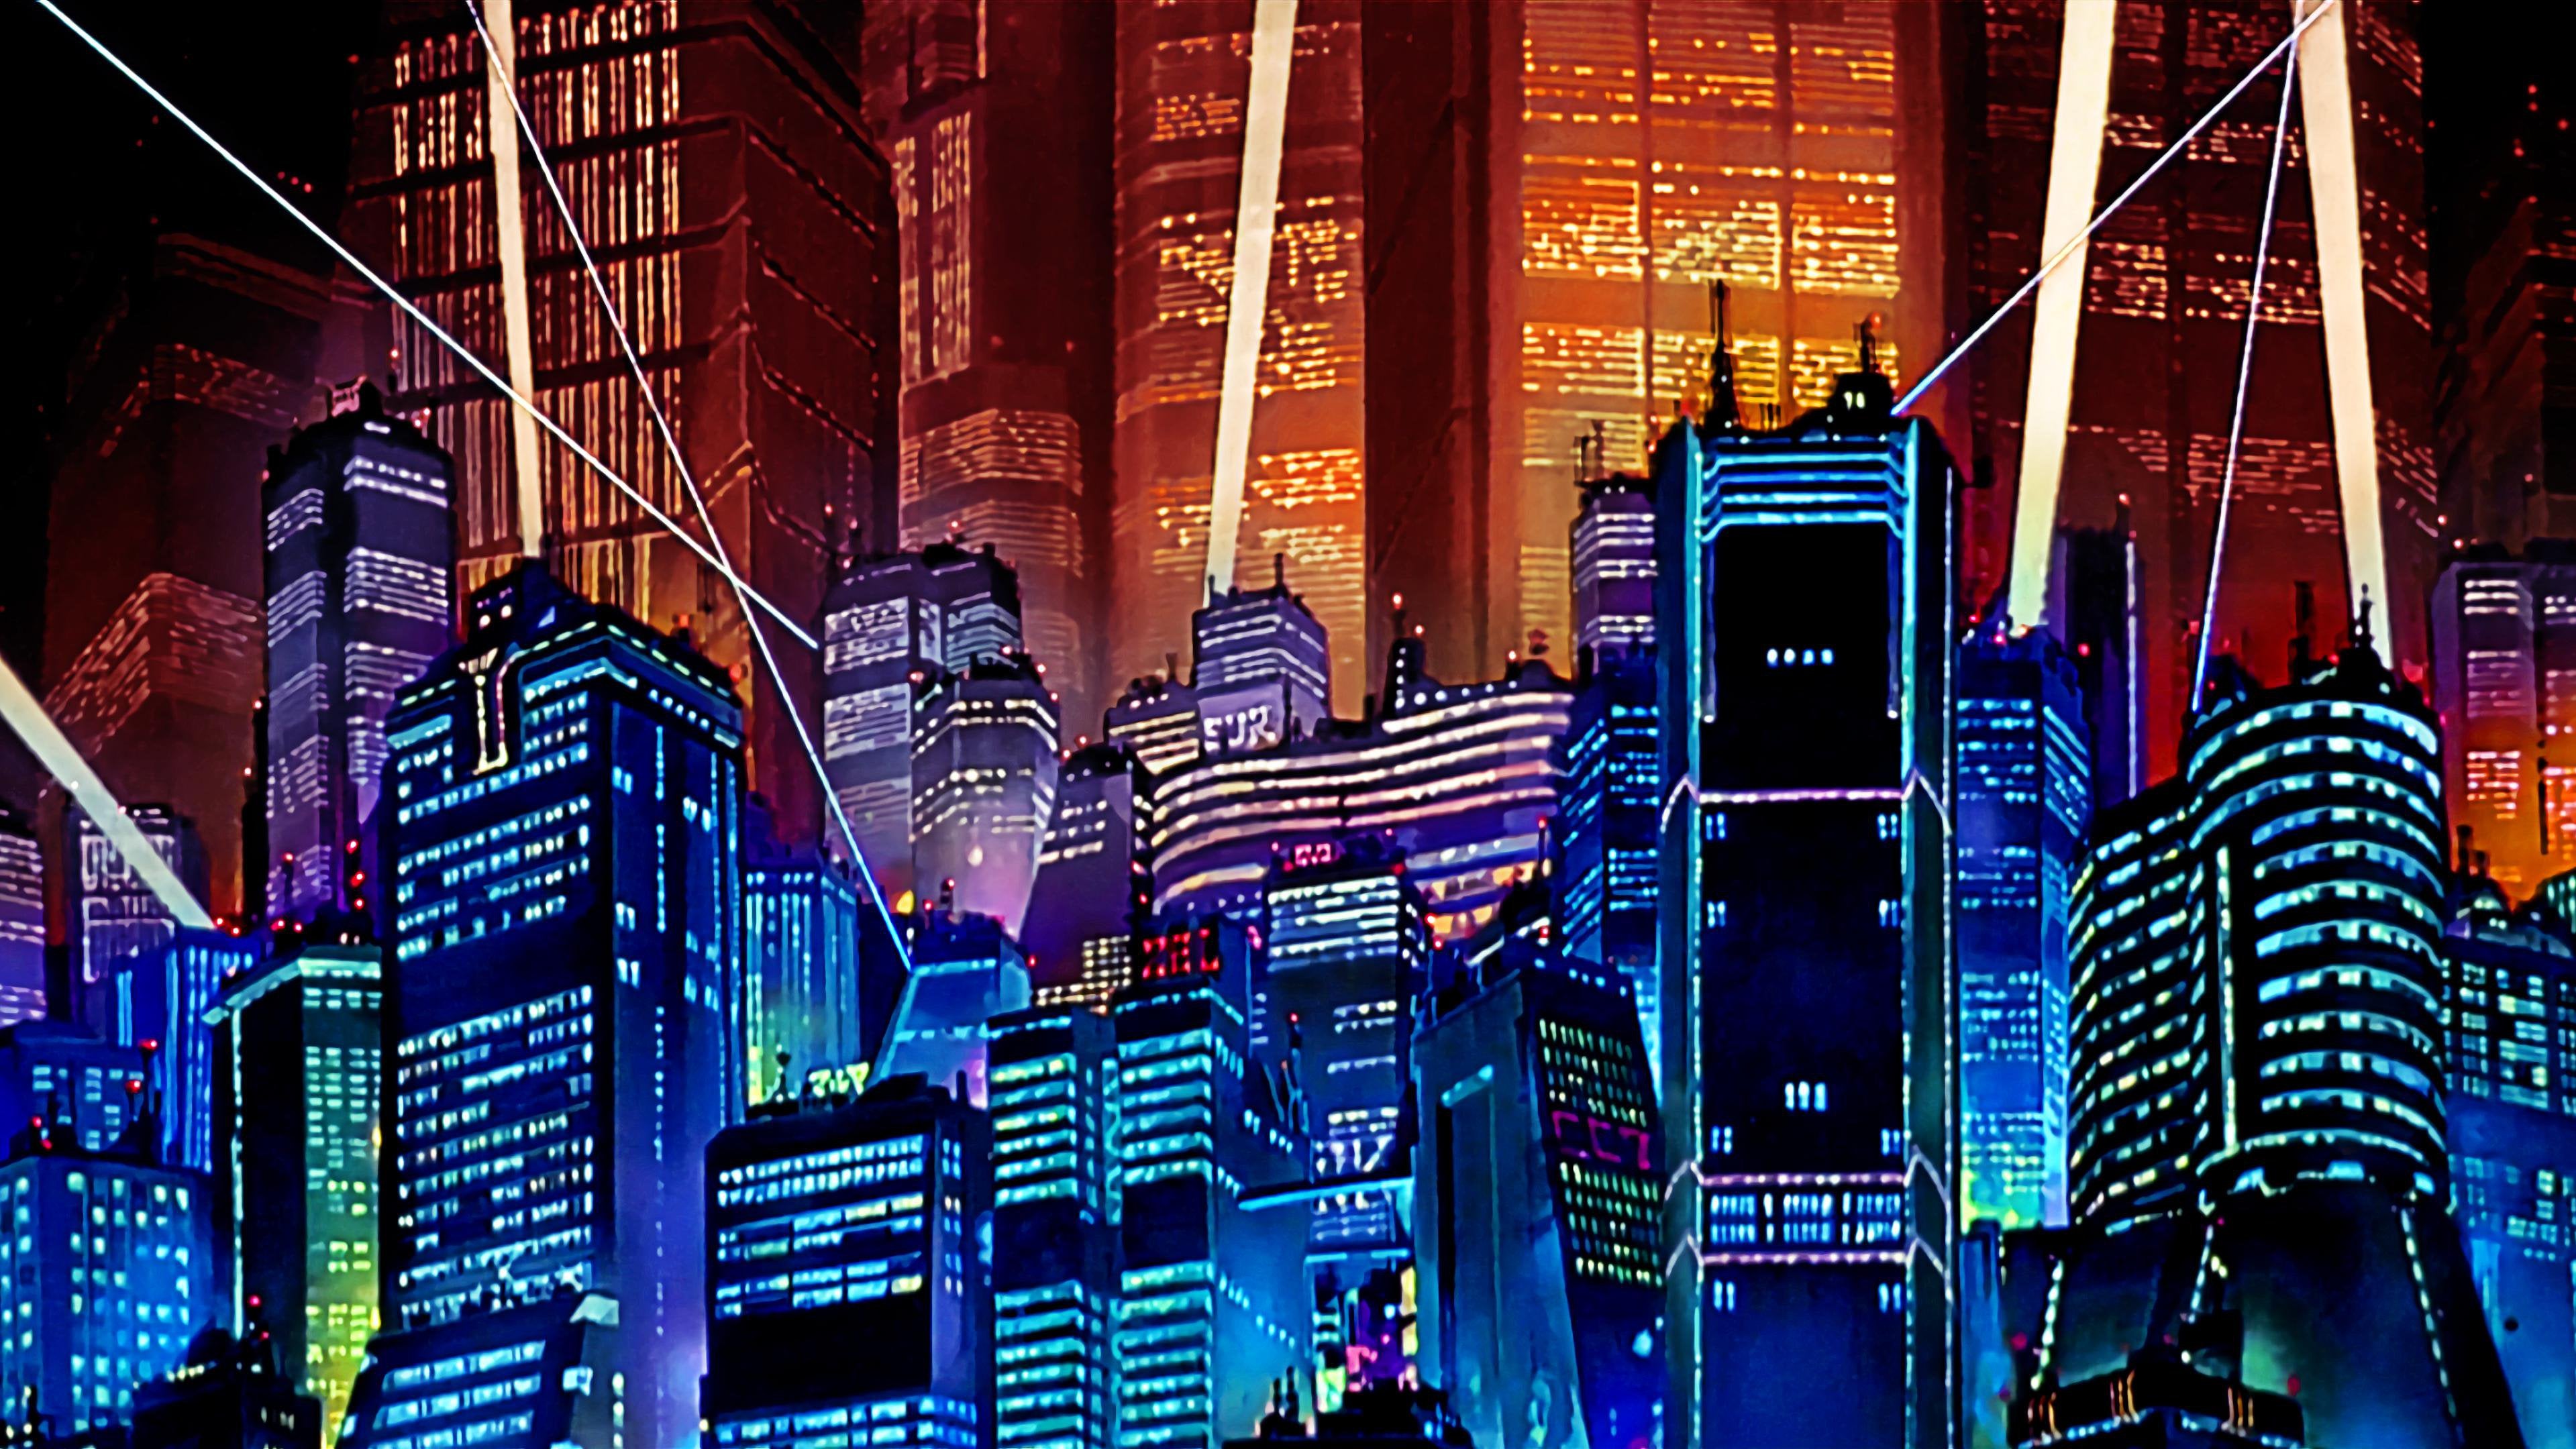 Akira Neo Tokyo Wallpaper Collection Enhanced and Radified)